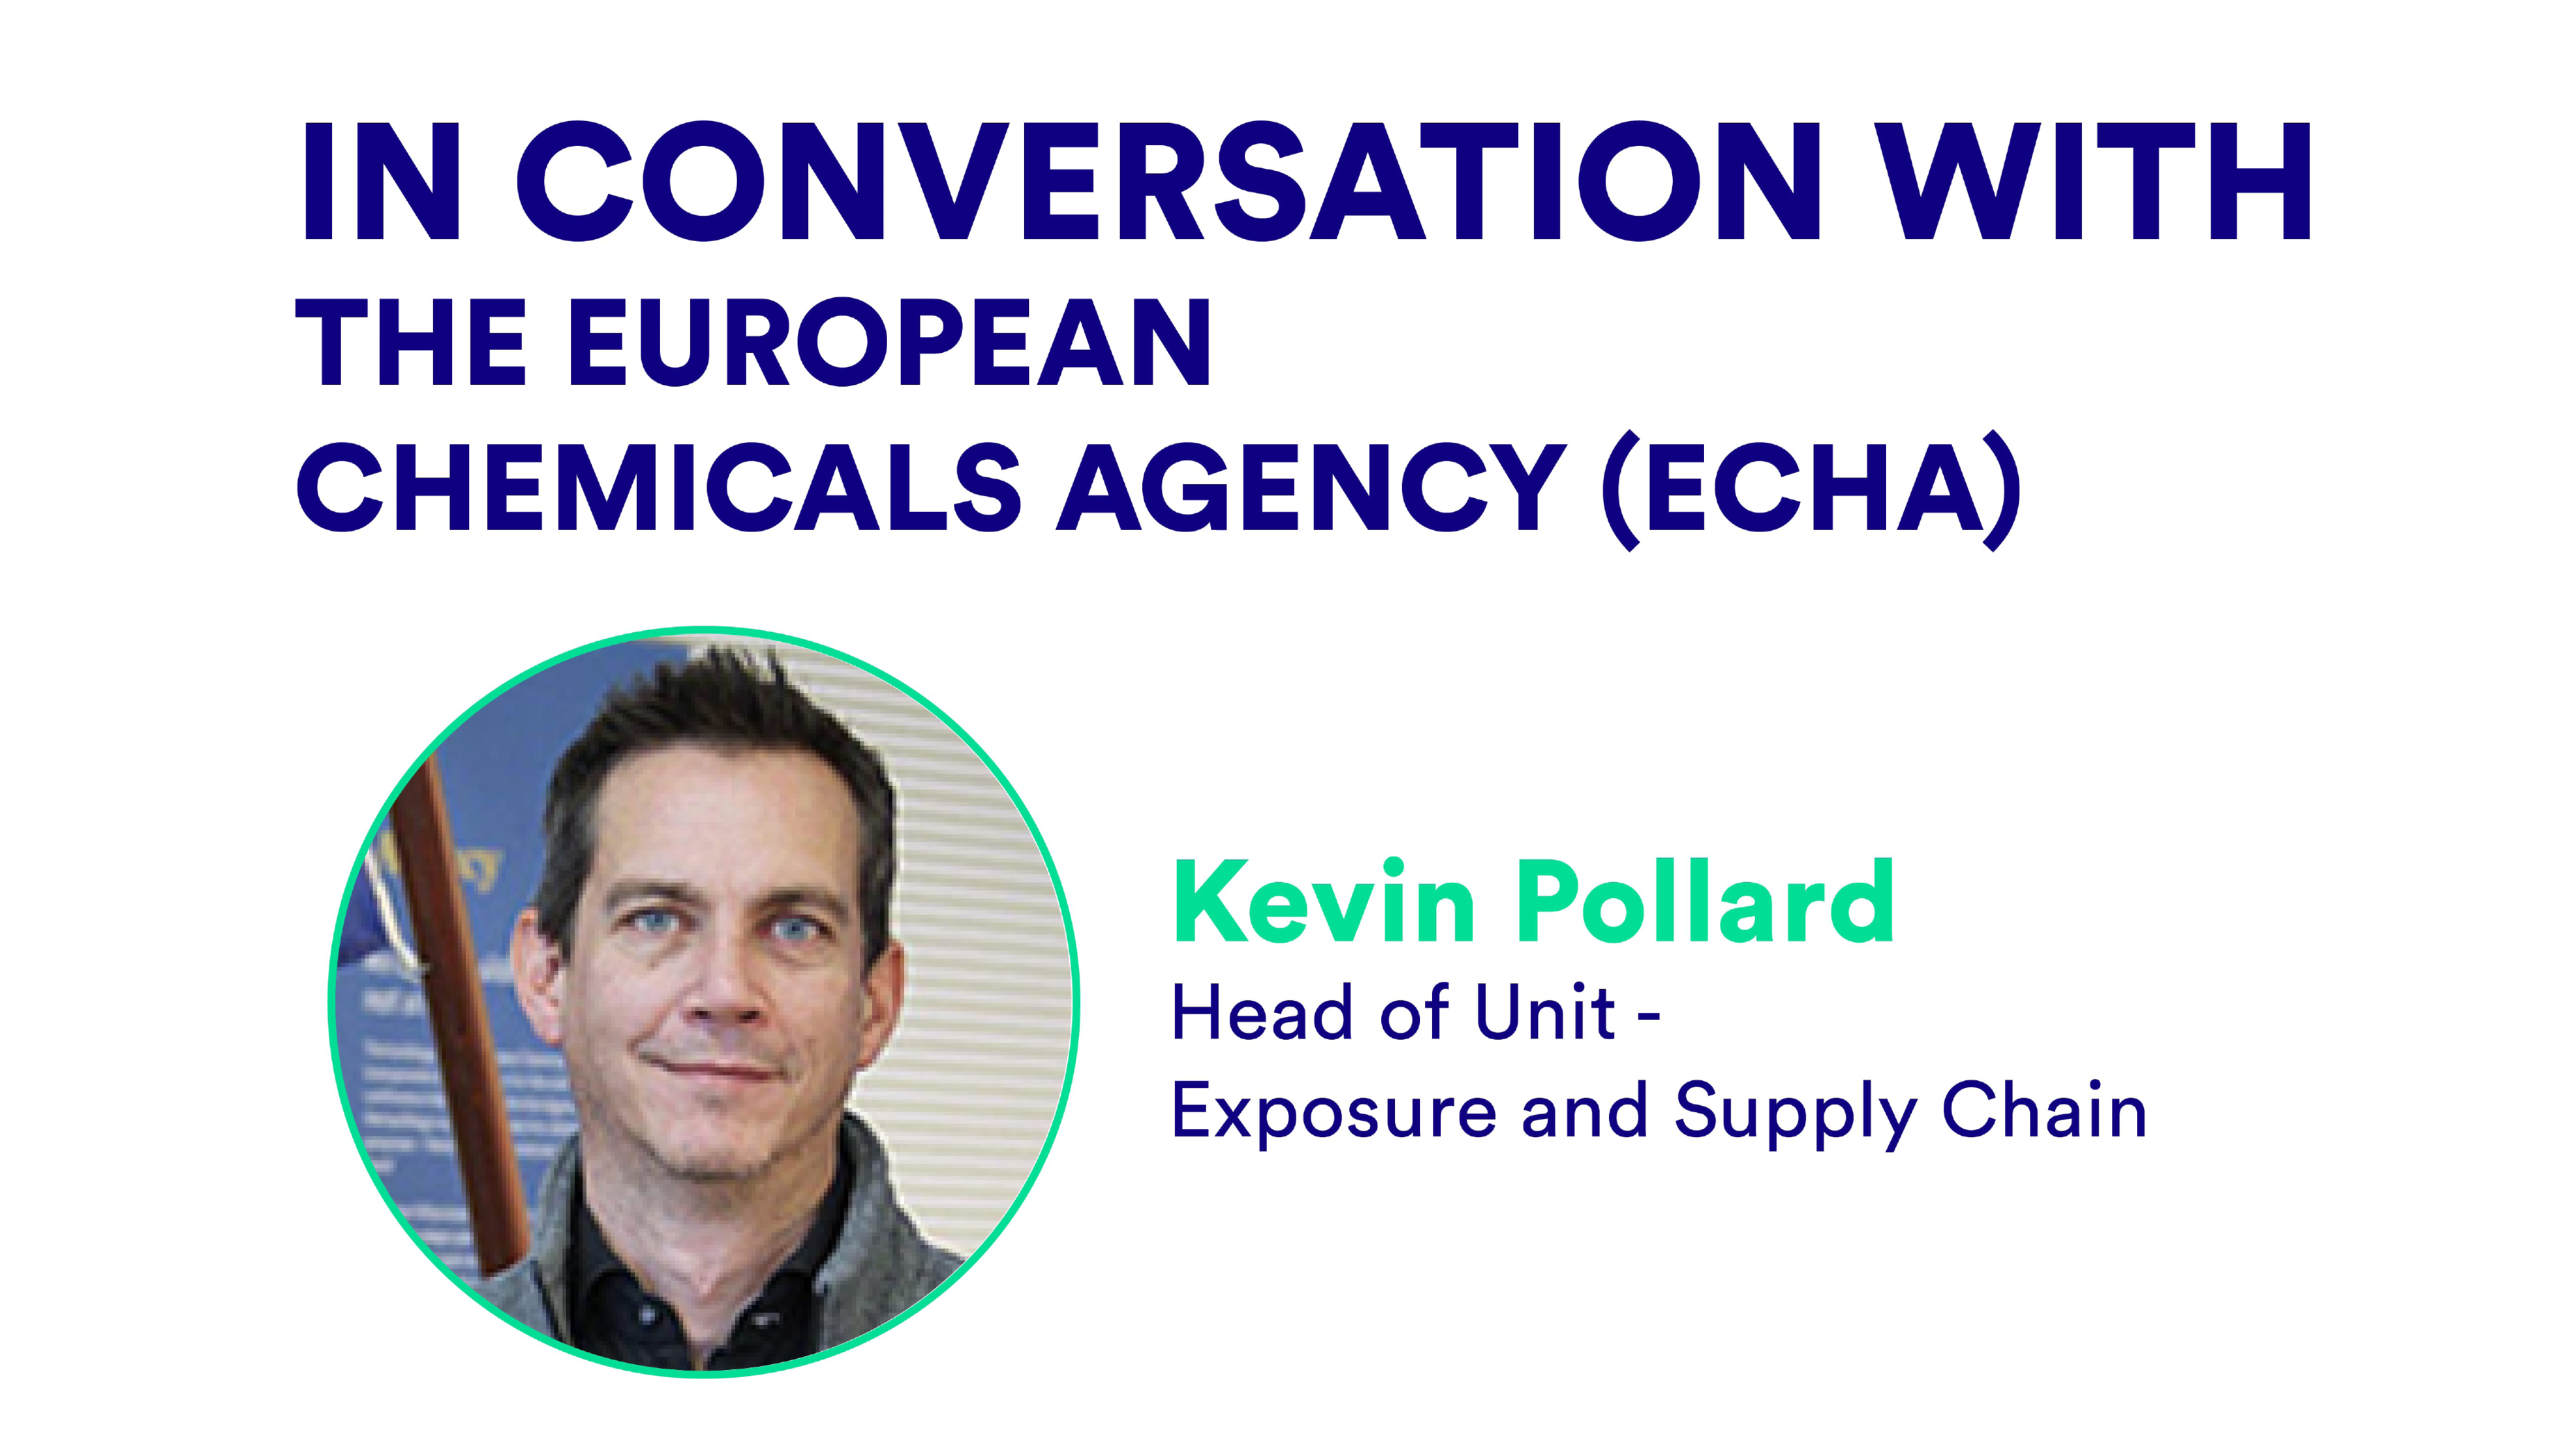 In conversation with the European Chemicals Agency (ECHA)